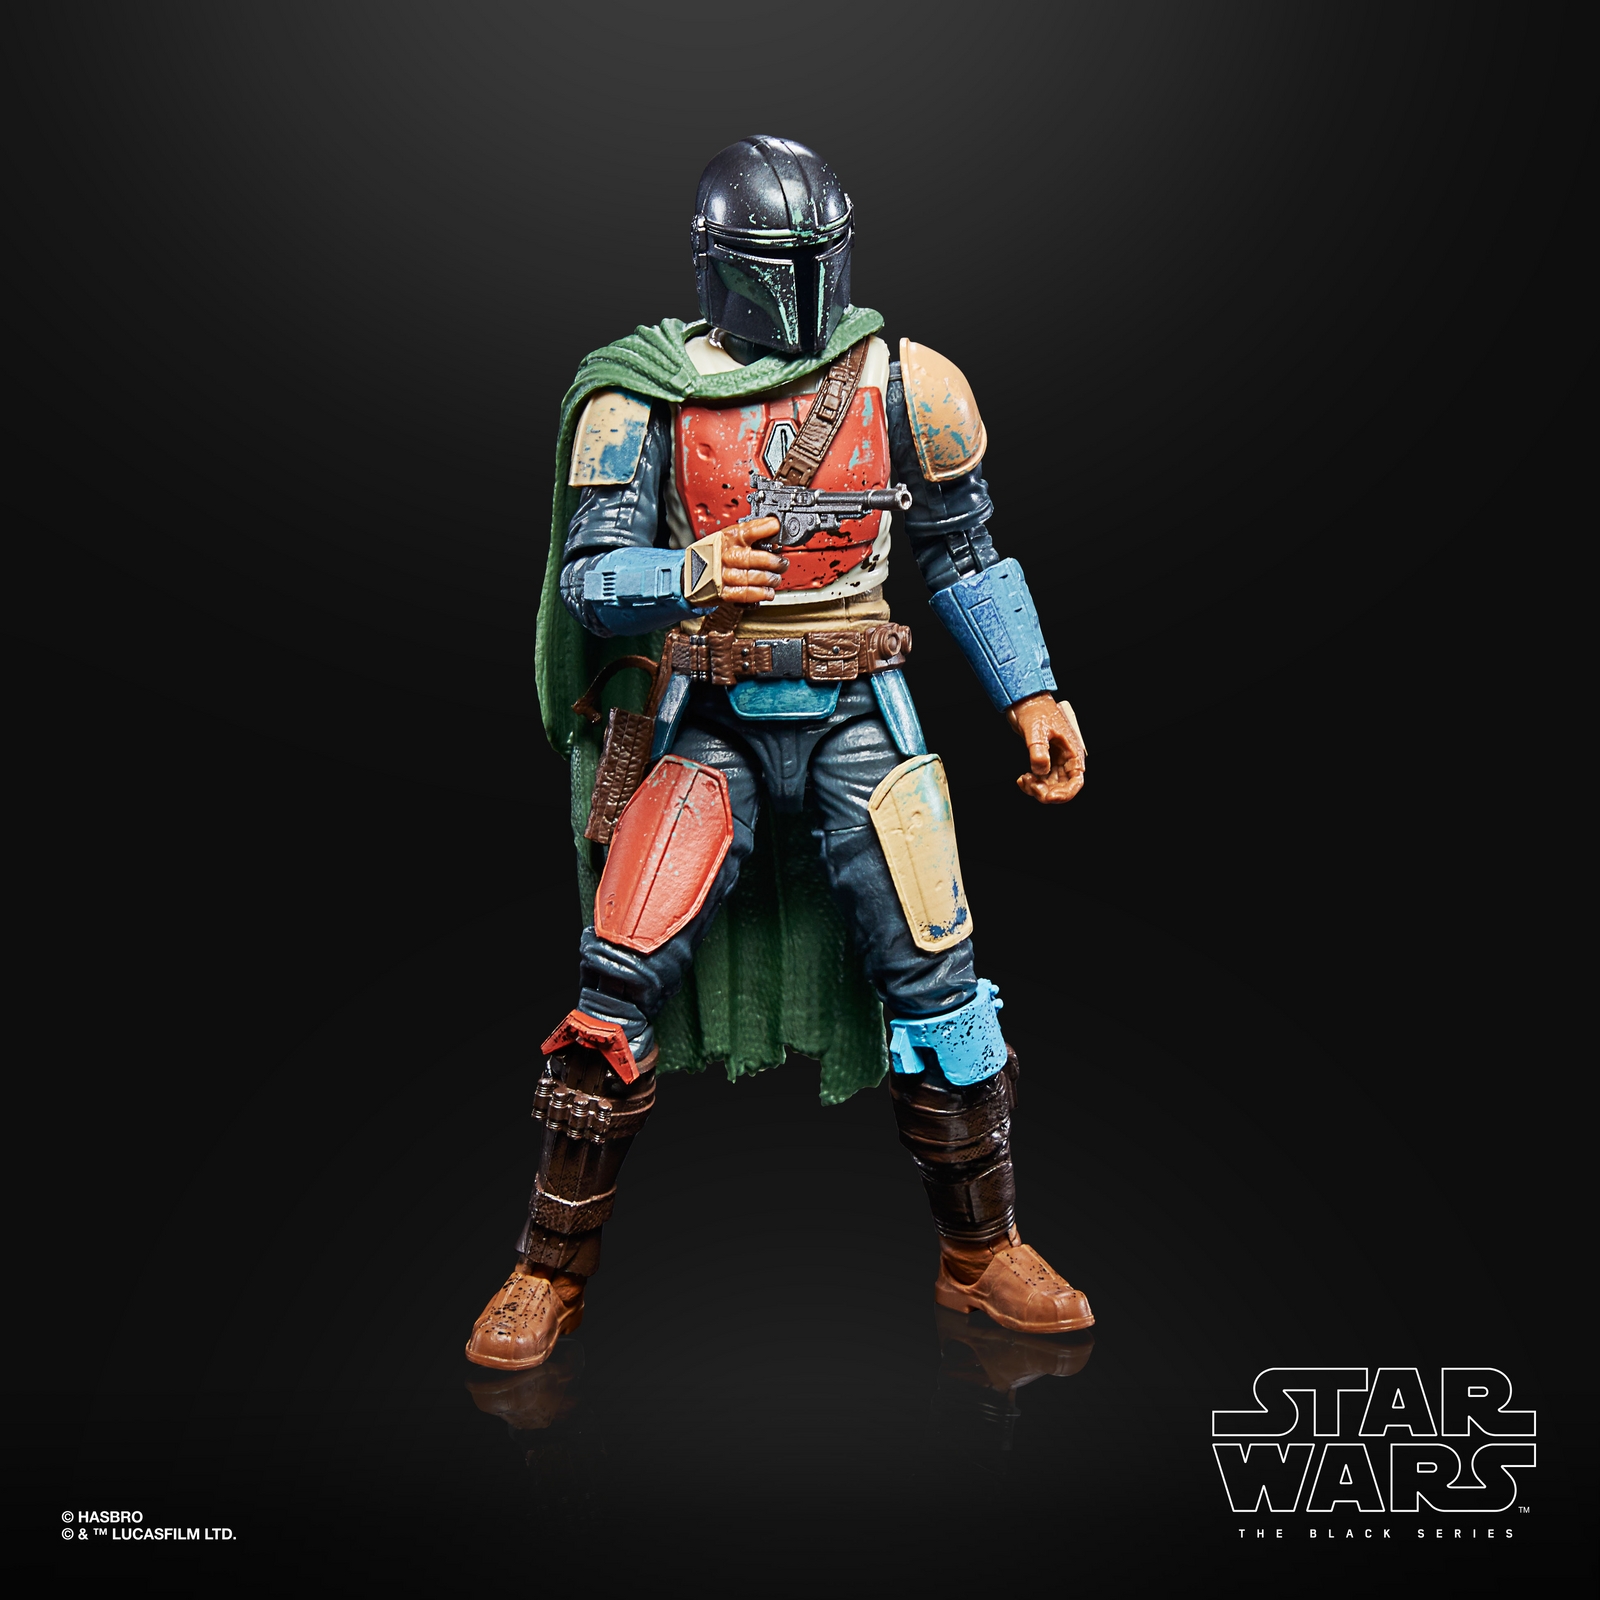 STAR WARS THE BLACK SERIES CREDIT COLLECTION 6-INCH THE MANDALORIAN Figure - oop 5.jpg